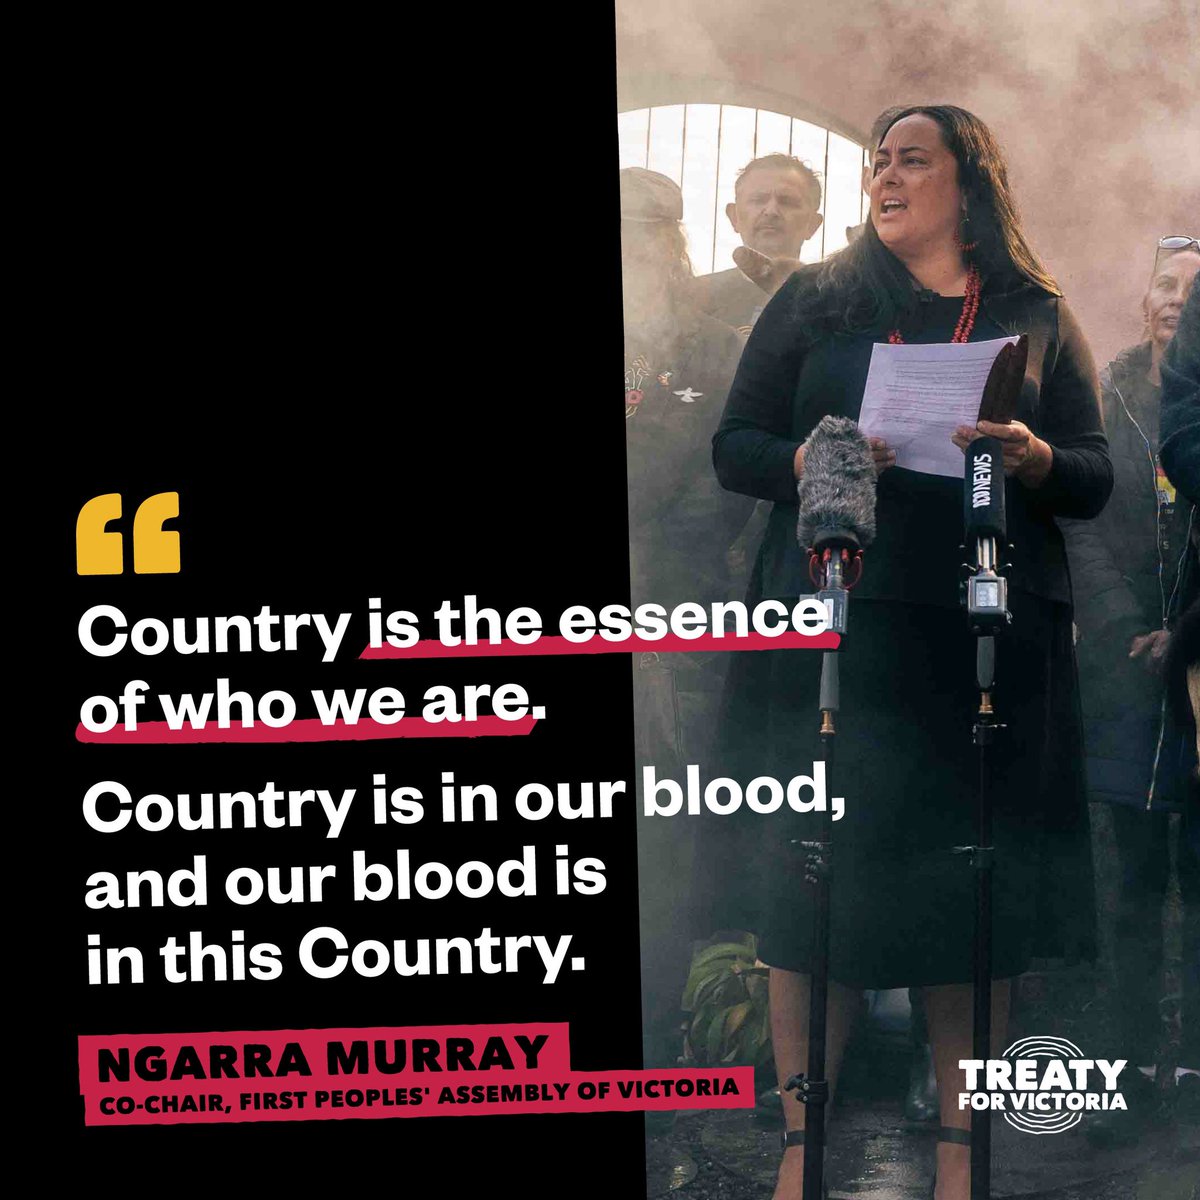 “Despite everything that has been inflicted on us, all the pain and suffering, we have survived, and our connection to Country remains strong. Our story in the land.” Read our Co-chair @ngarra_murray’s opening statement in full: firstpeoplesvic.org/news/country-i… #Treaty